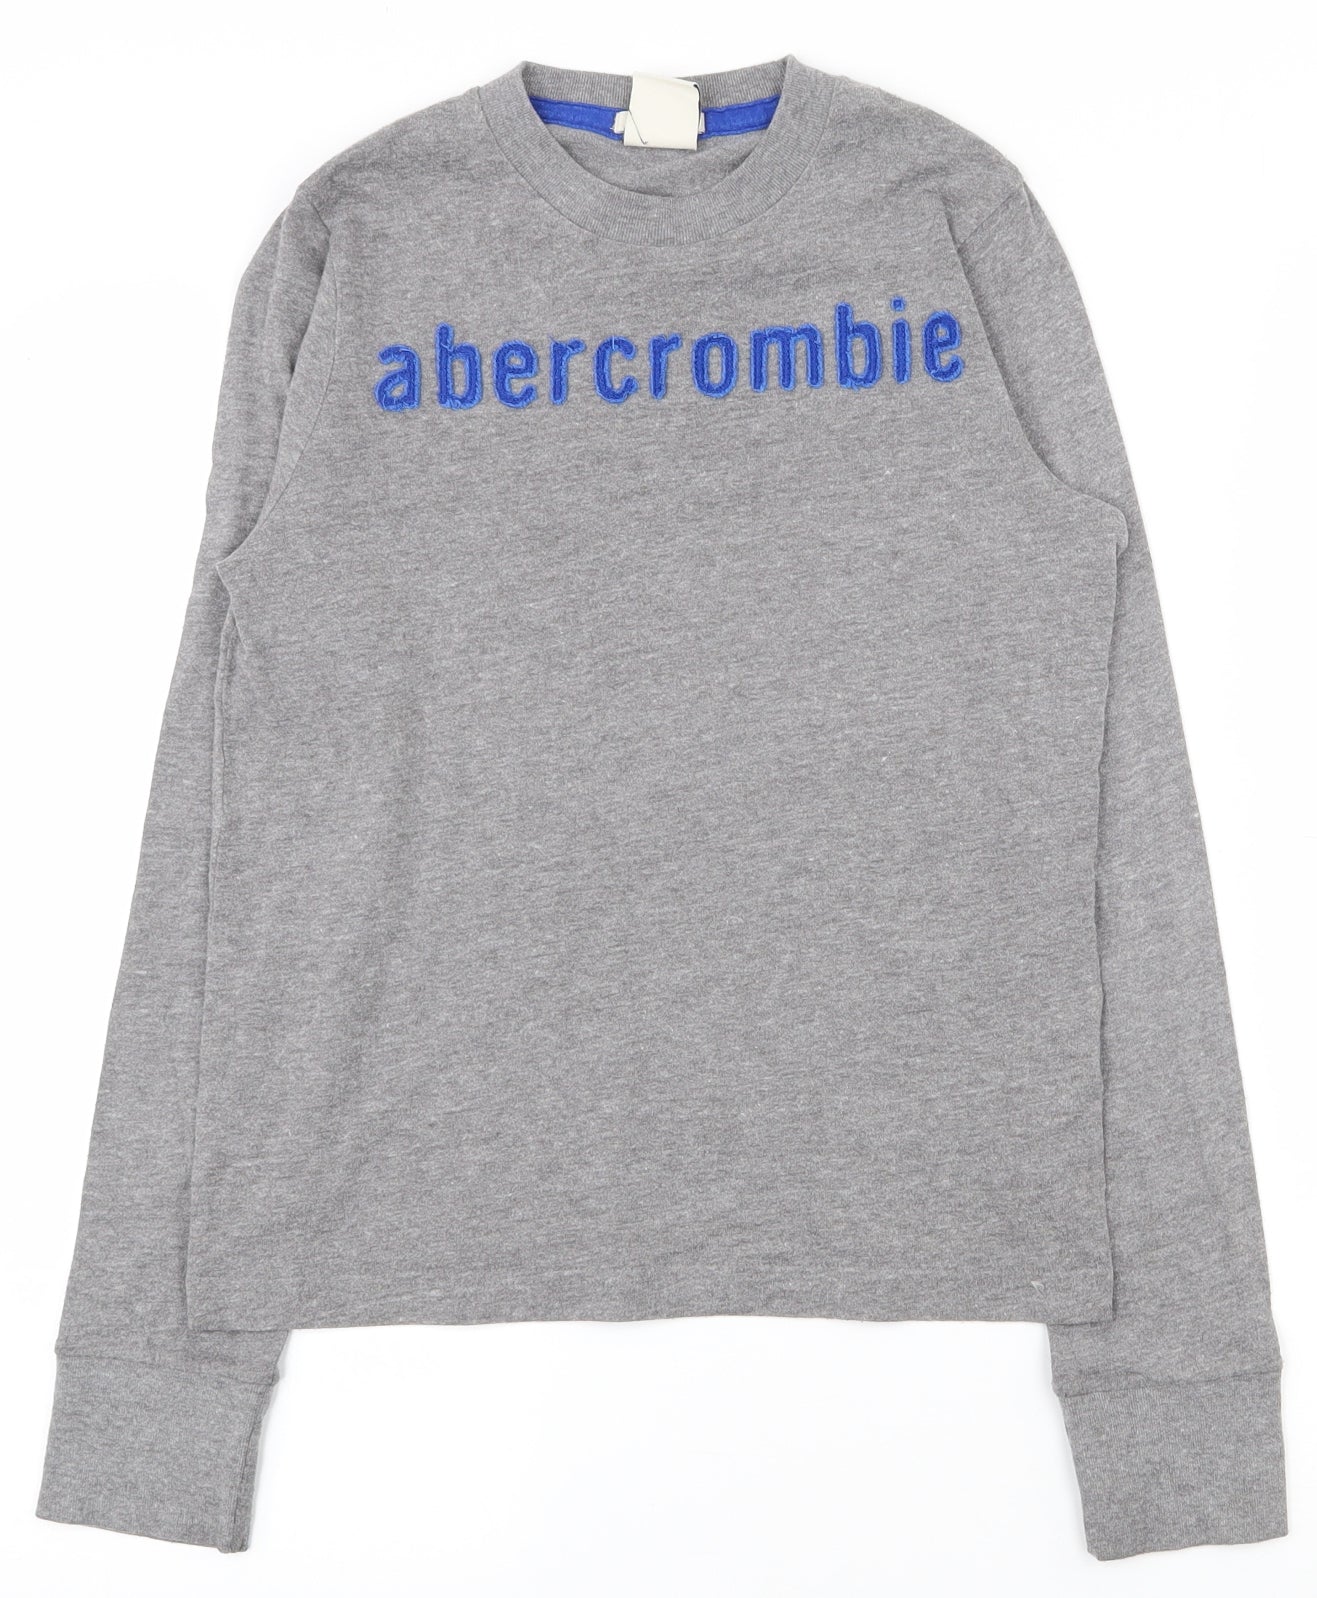 abercrombie kids Boys Grey  Cotton Pullover T-Shirt Size M Crew Neck Pullover